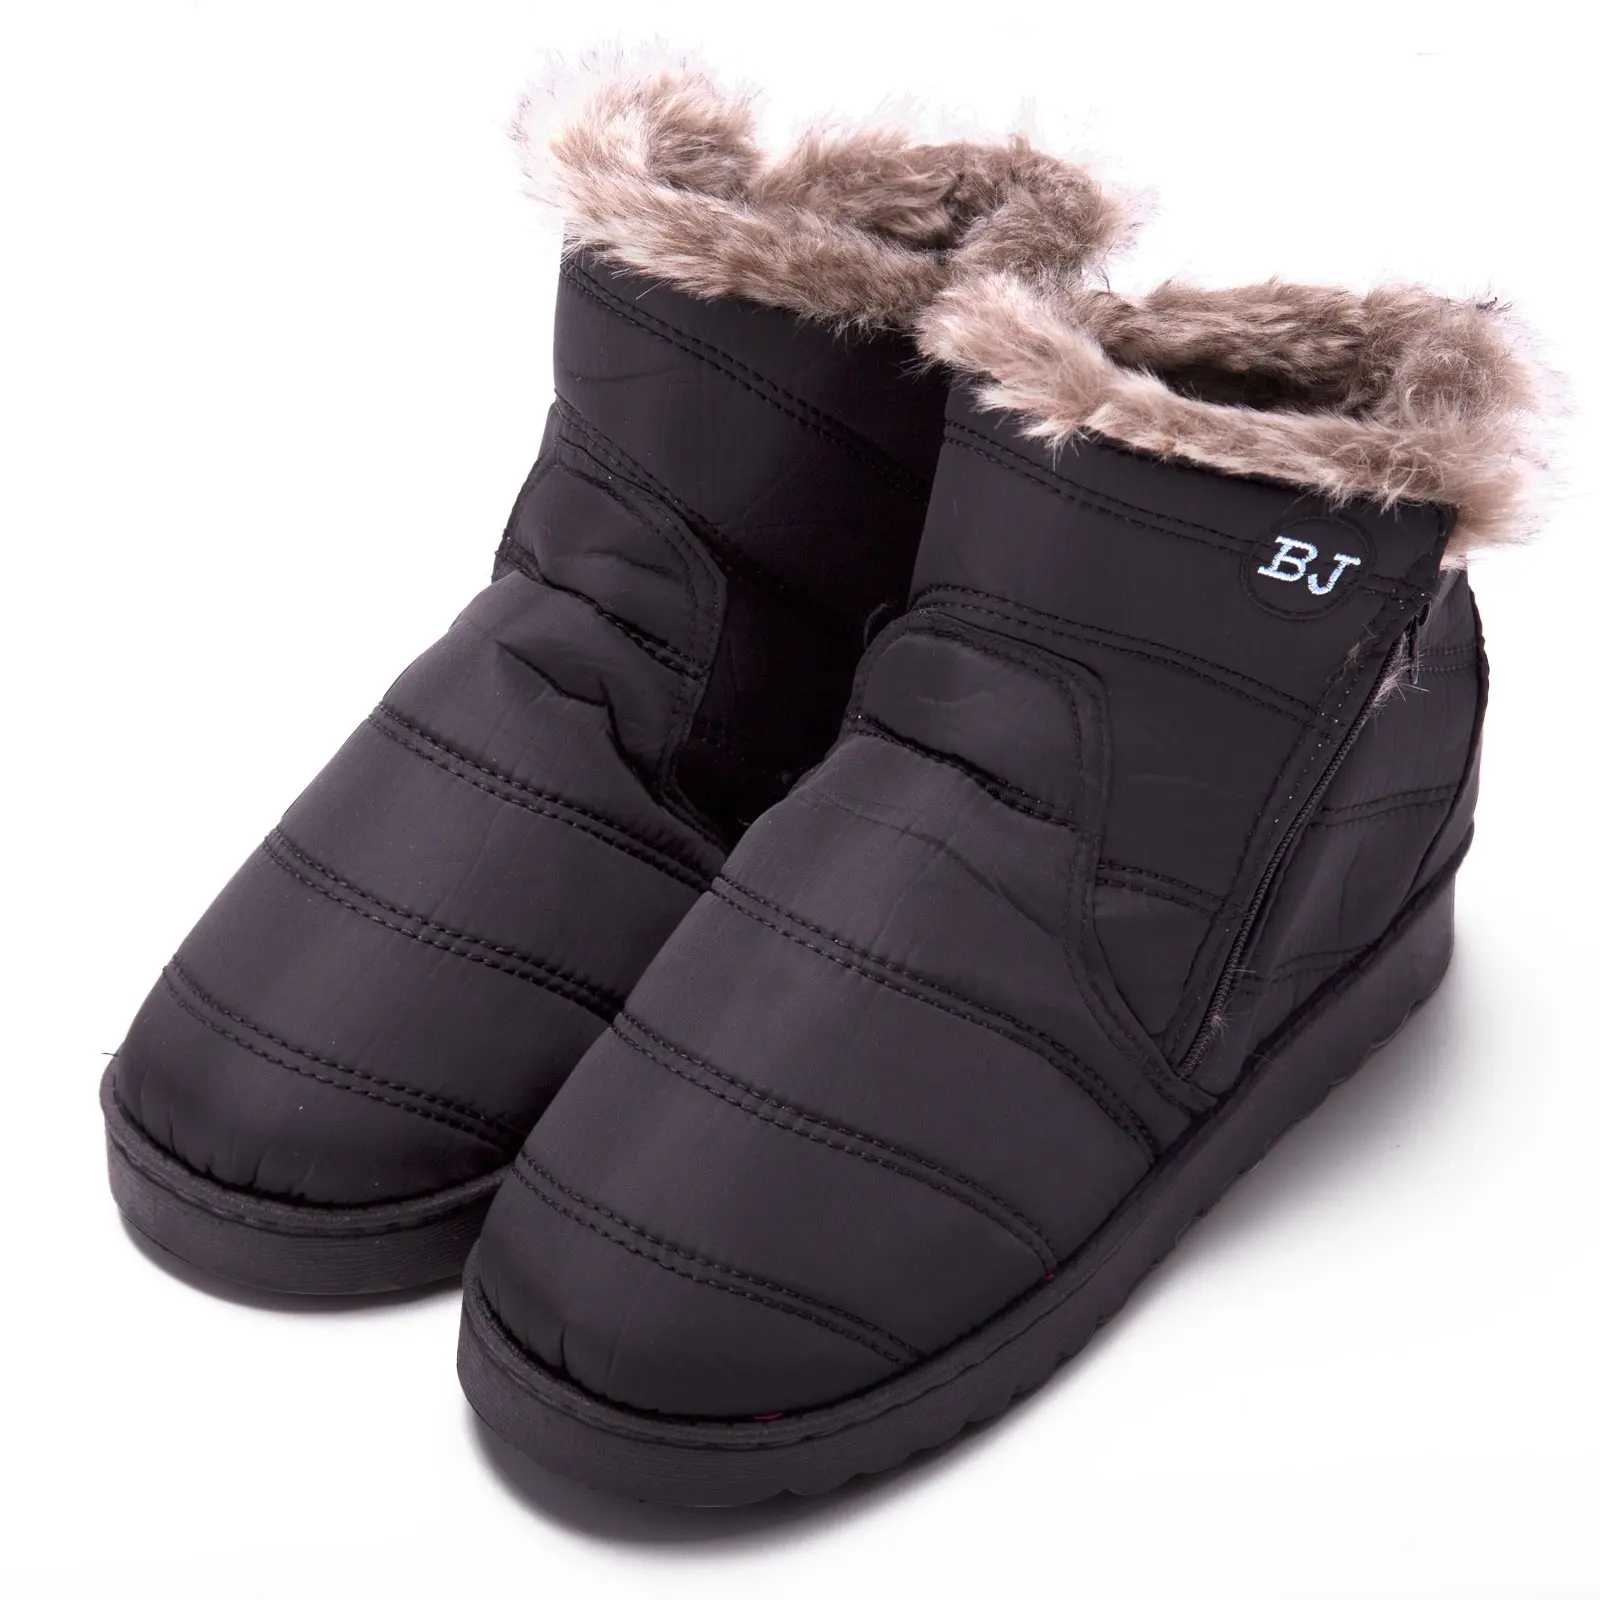 Waterproof Snow Sneakers Boots Fur Lined Ankle High-Top Outdoor Slip-on Booties Anti-Slip Winter Shoes for Womens Men